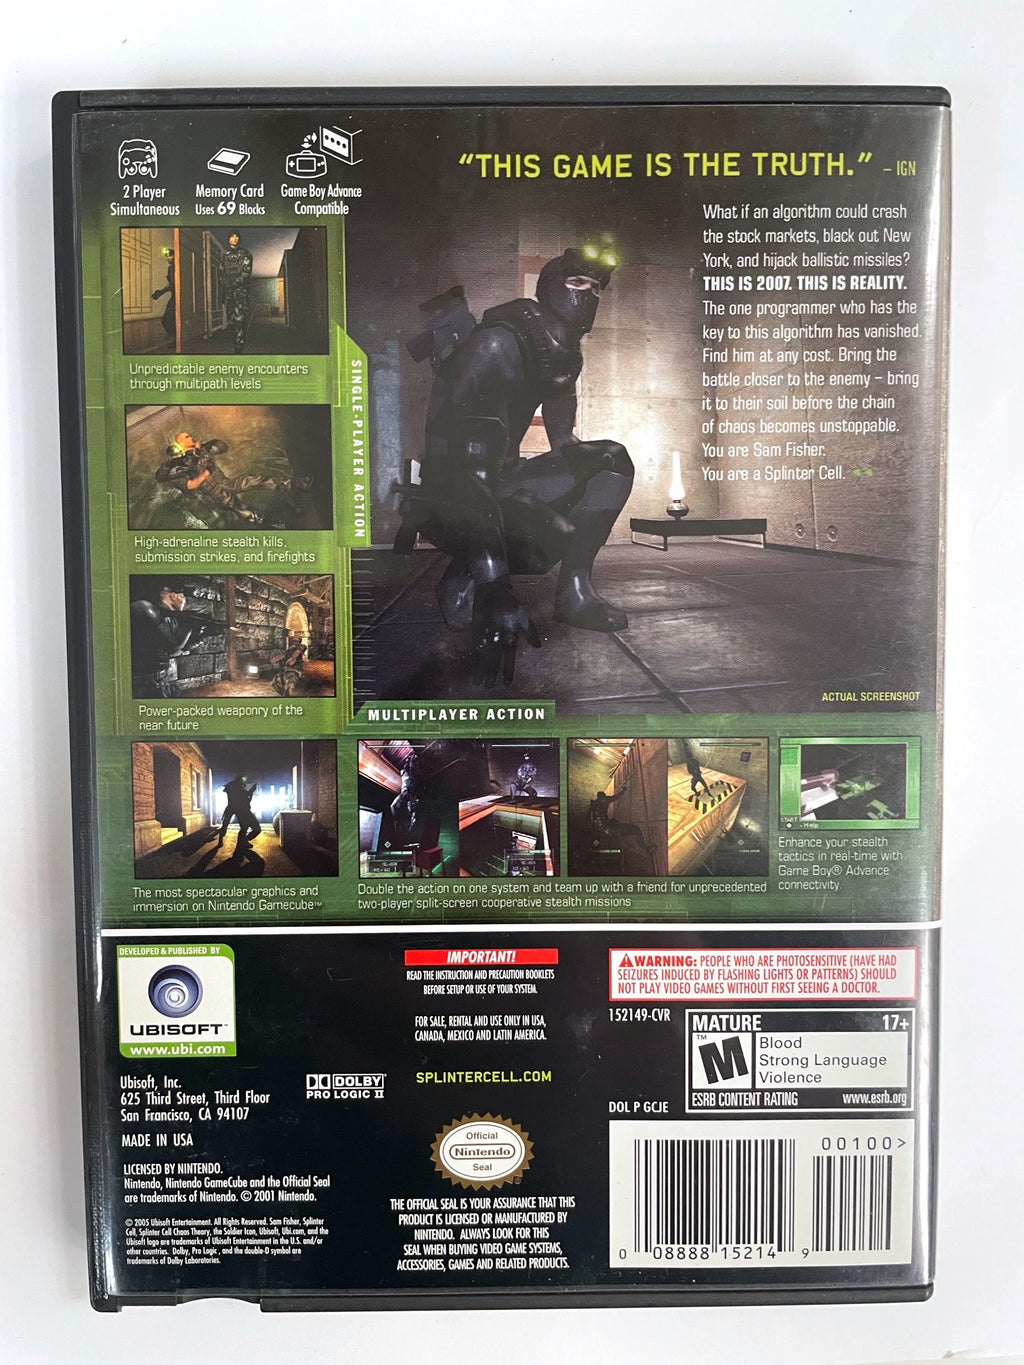 Splinter Cell (PS2/GameCube), Full Game, Complete Stealth, Minimal  Knockouts